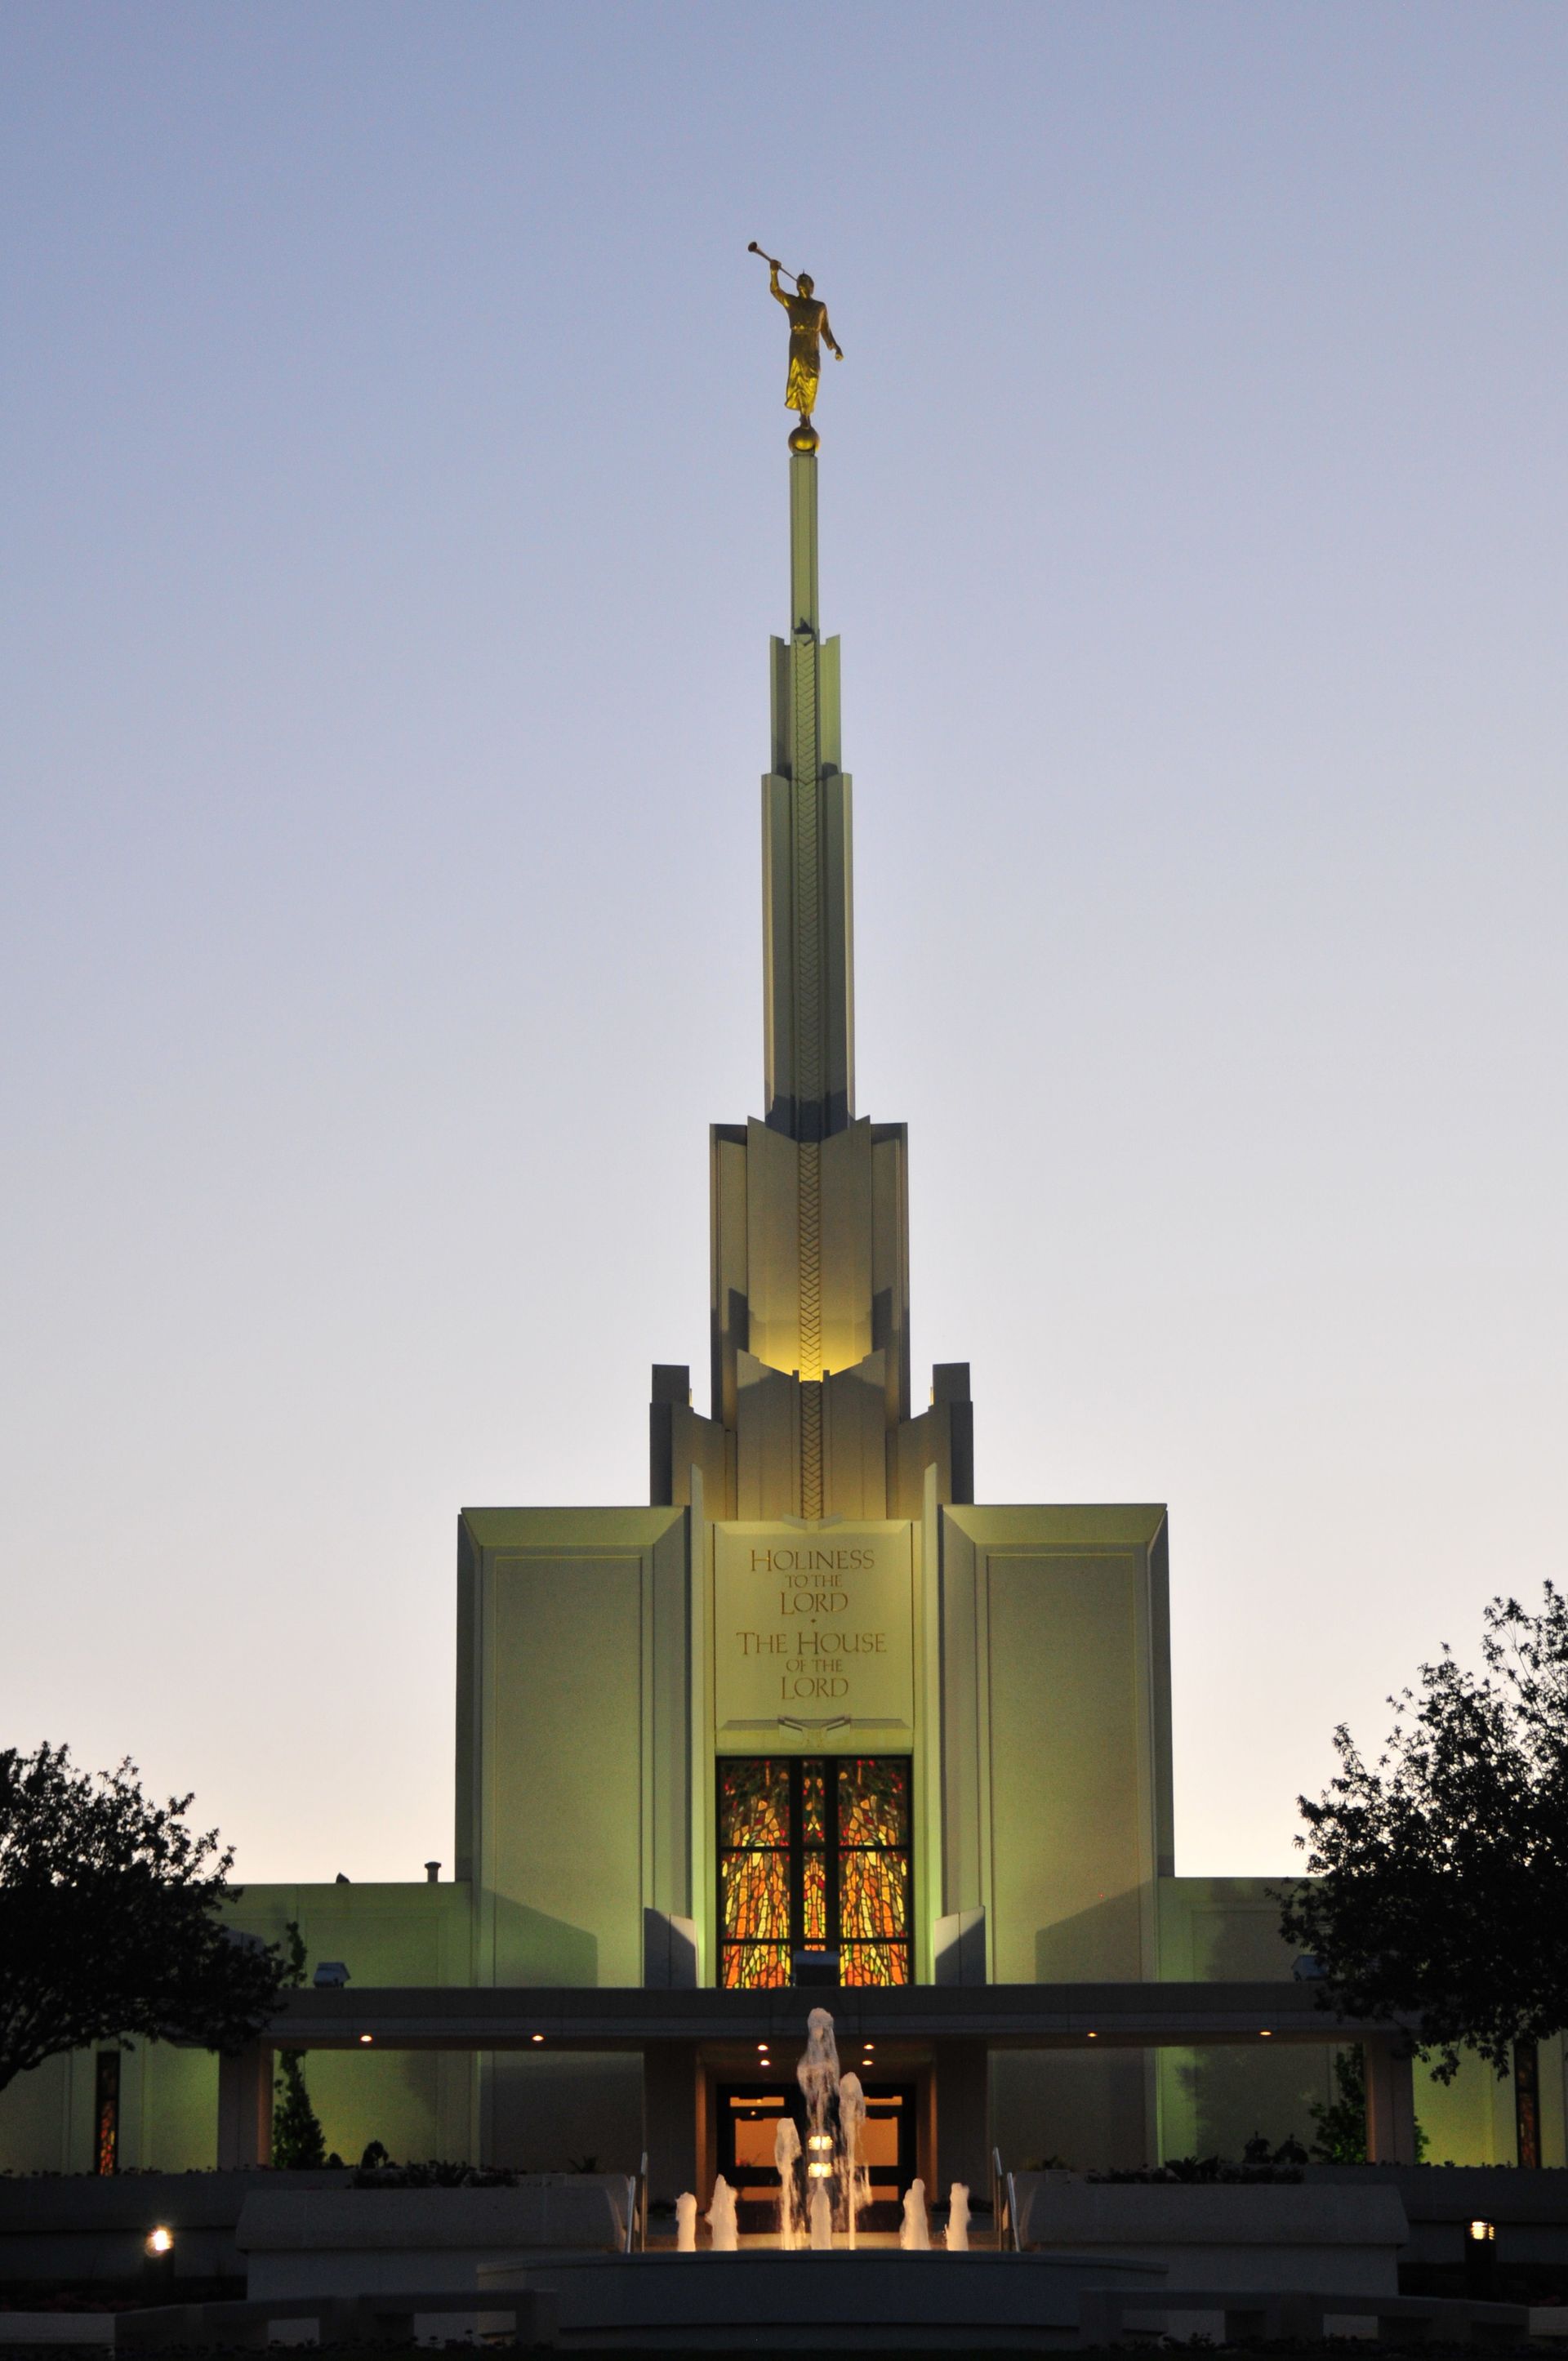 A view of the Denver Colorado Temple at night.